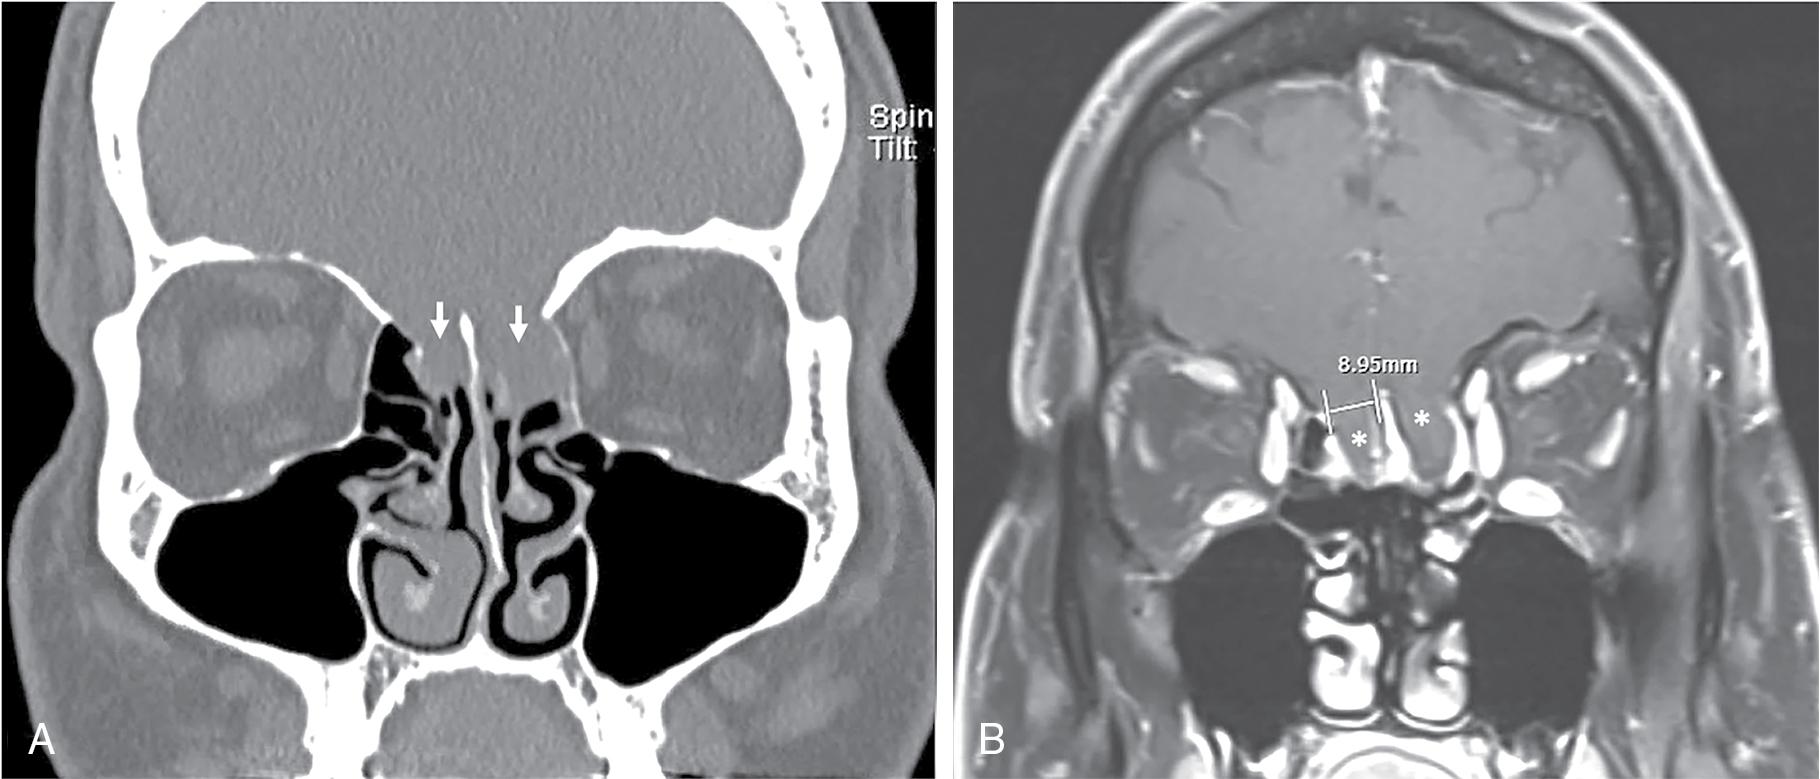 Fig. 12.2, Coronal sinus computed tomography ( A ) and T1-weighted postcontrast magnetic resonance imaging ( B ) show an atypical injury to the cribriform and ethmoid roof with bilateral ethmoid skull base bony defects (arrows) and bilateral meningoencephaloceles (stars) in setting of iatrogenic cerebrospinal fluid rhinorrhea after septoplasty